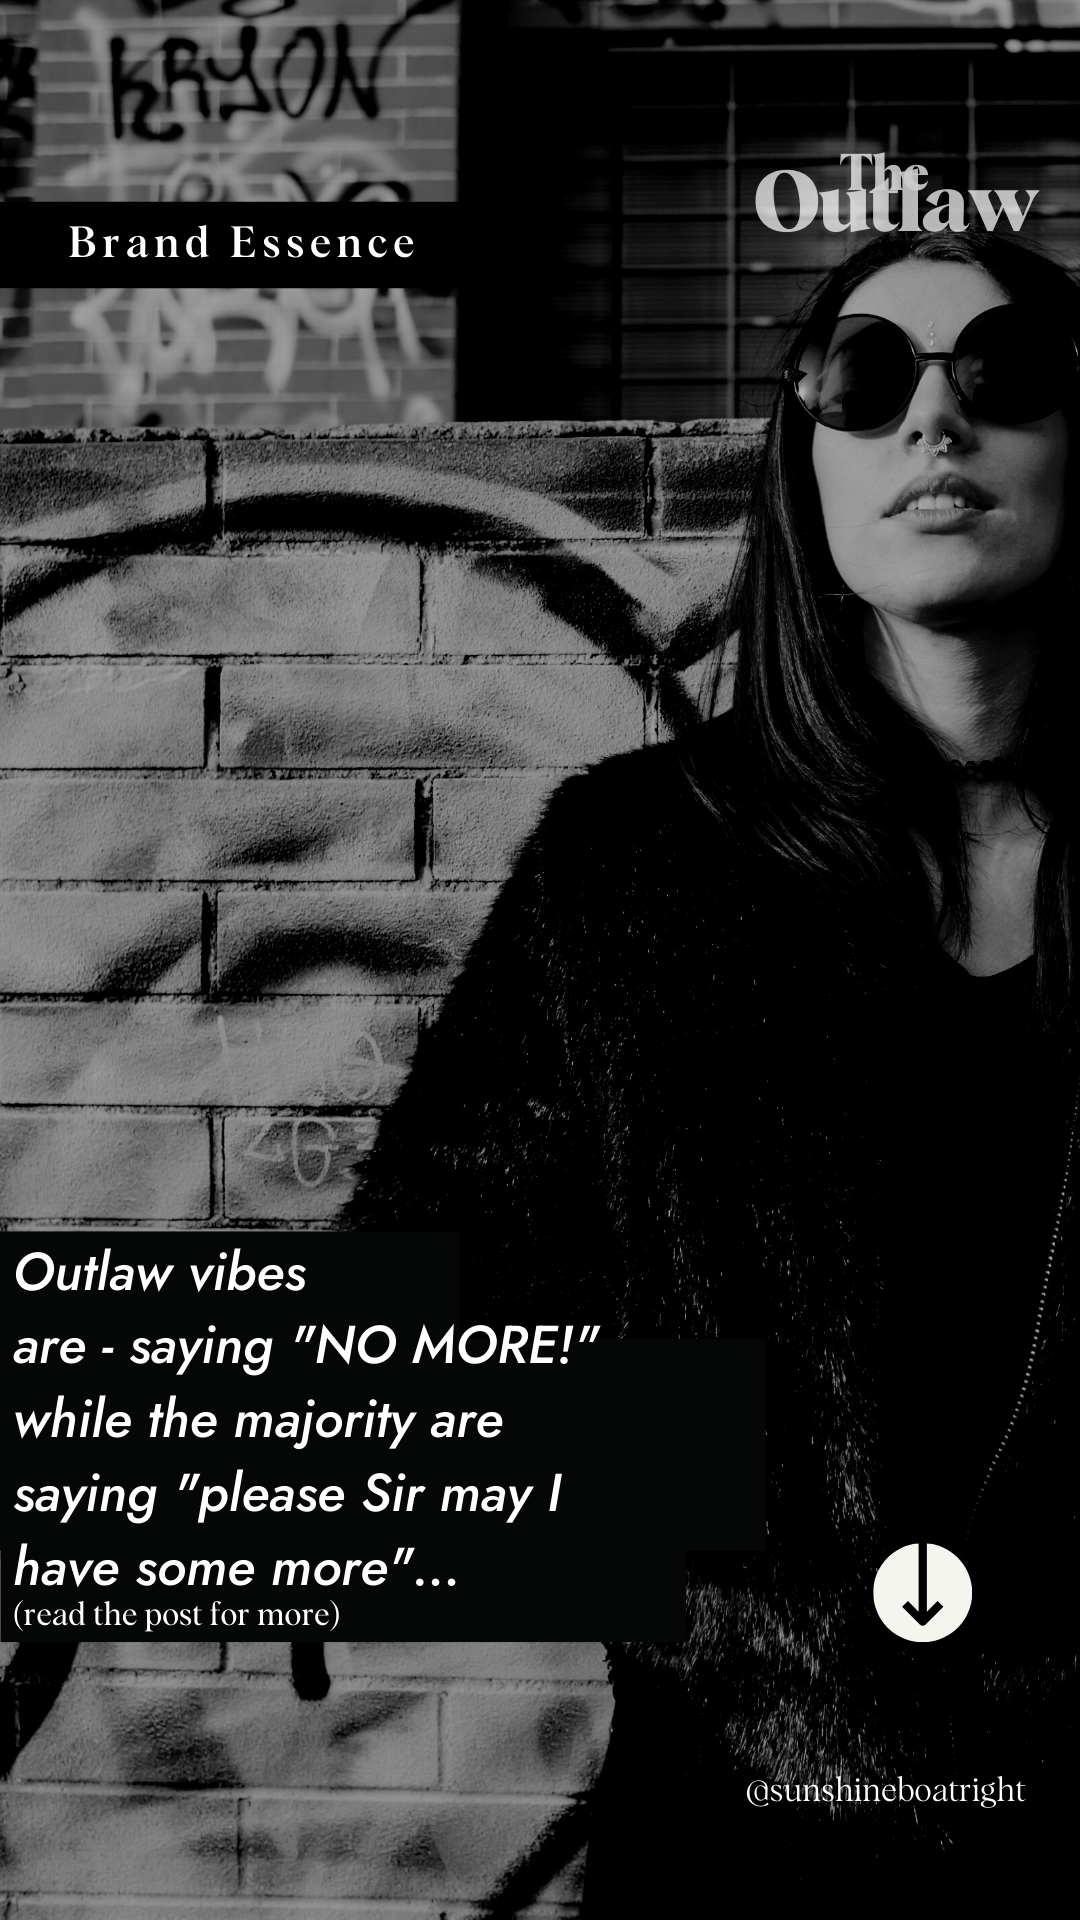 Brand Archetype Essence: Outlaw vibes are saying no more while the majority are saying please sir may I have some more.